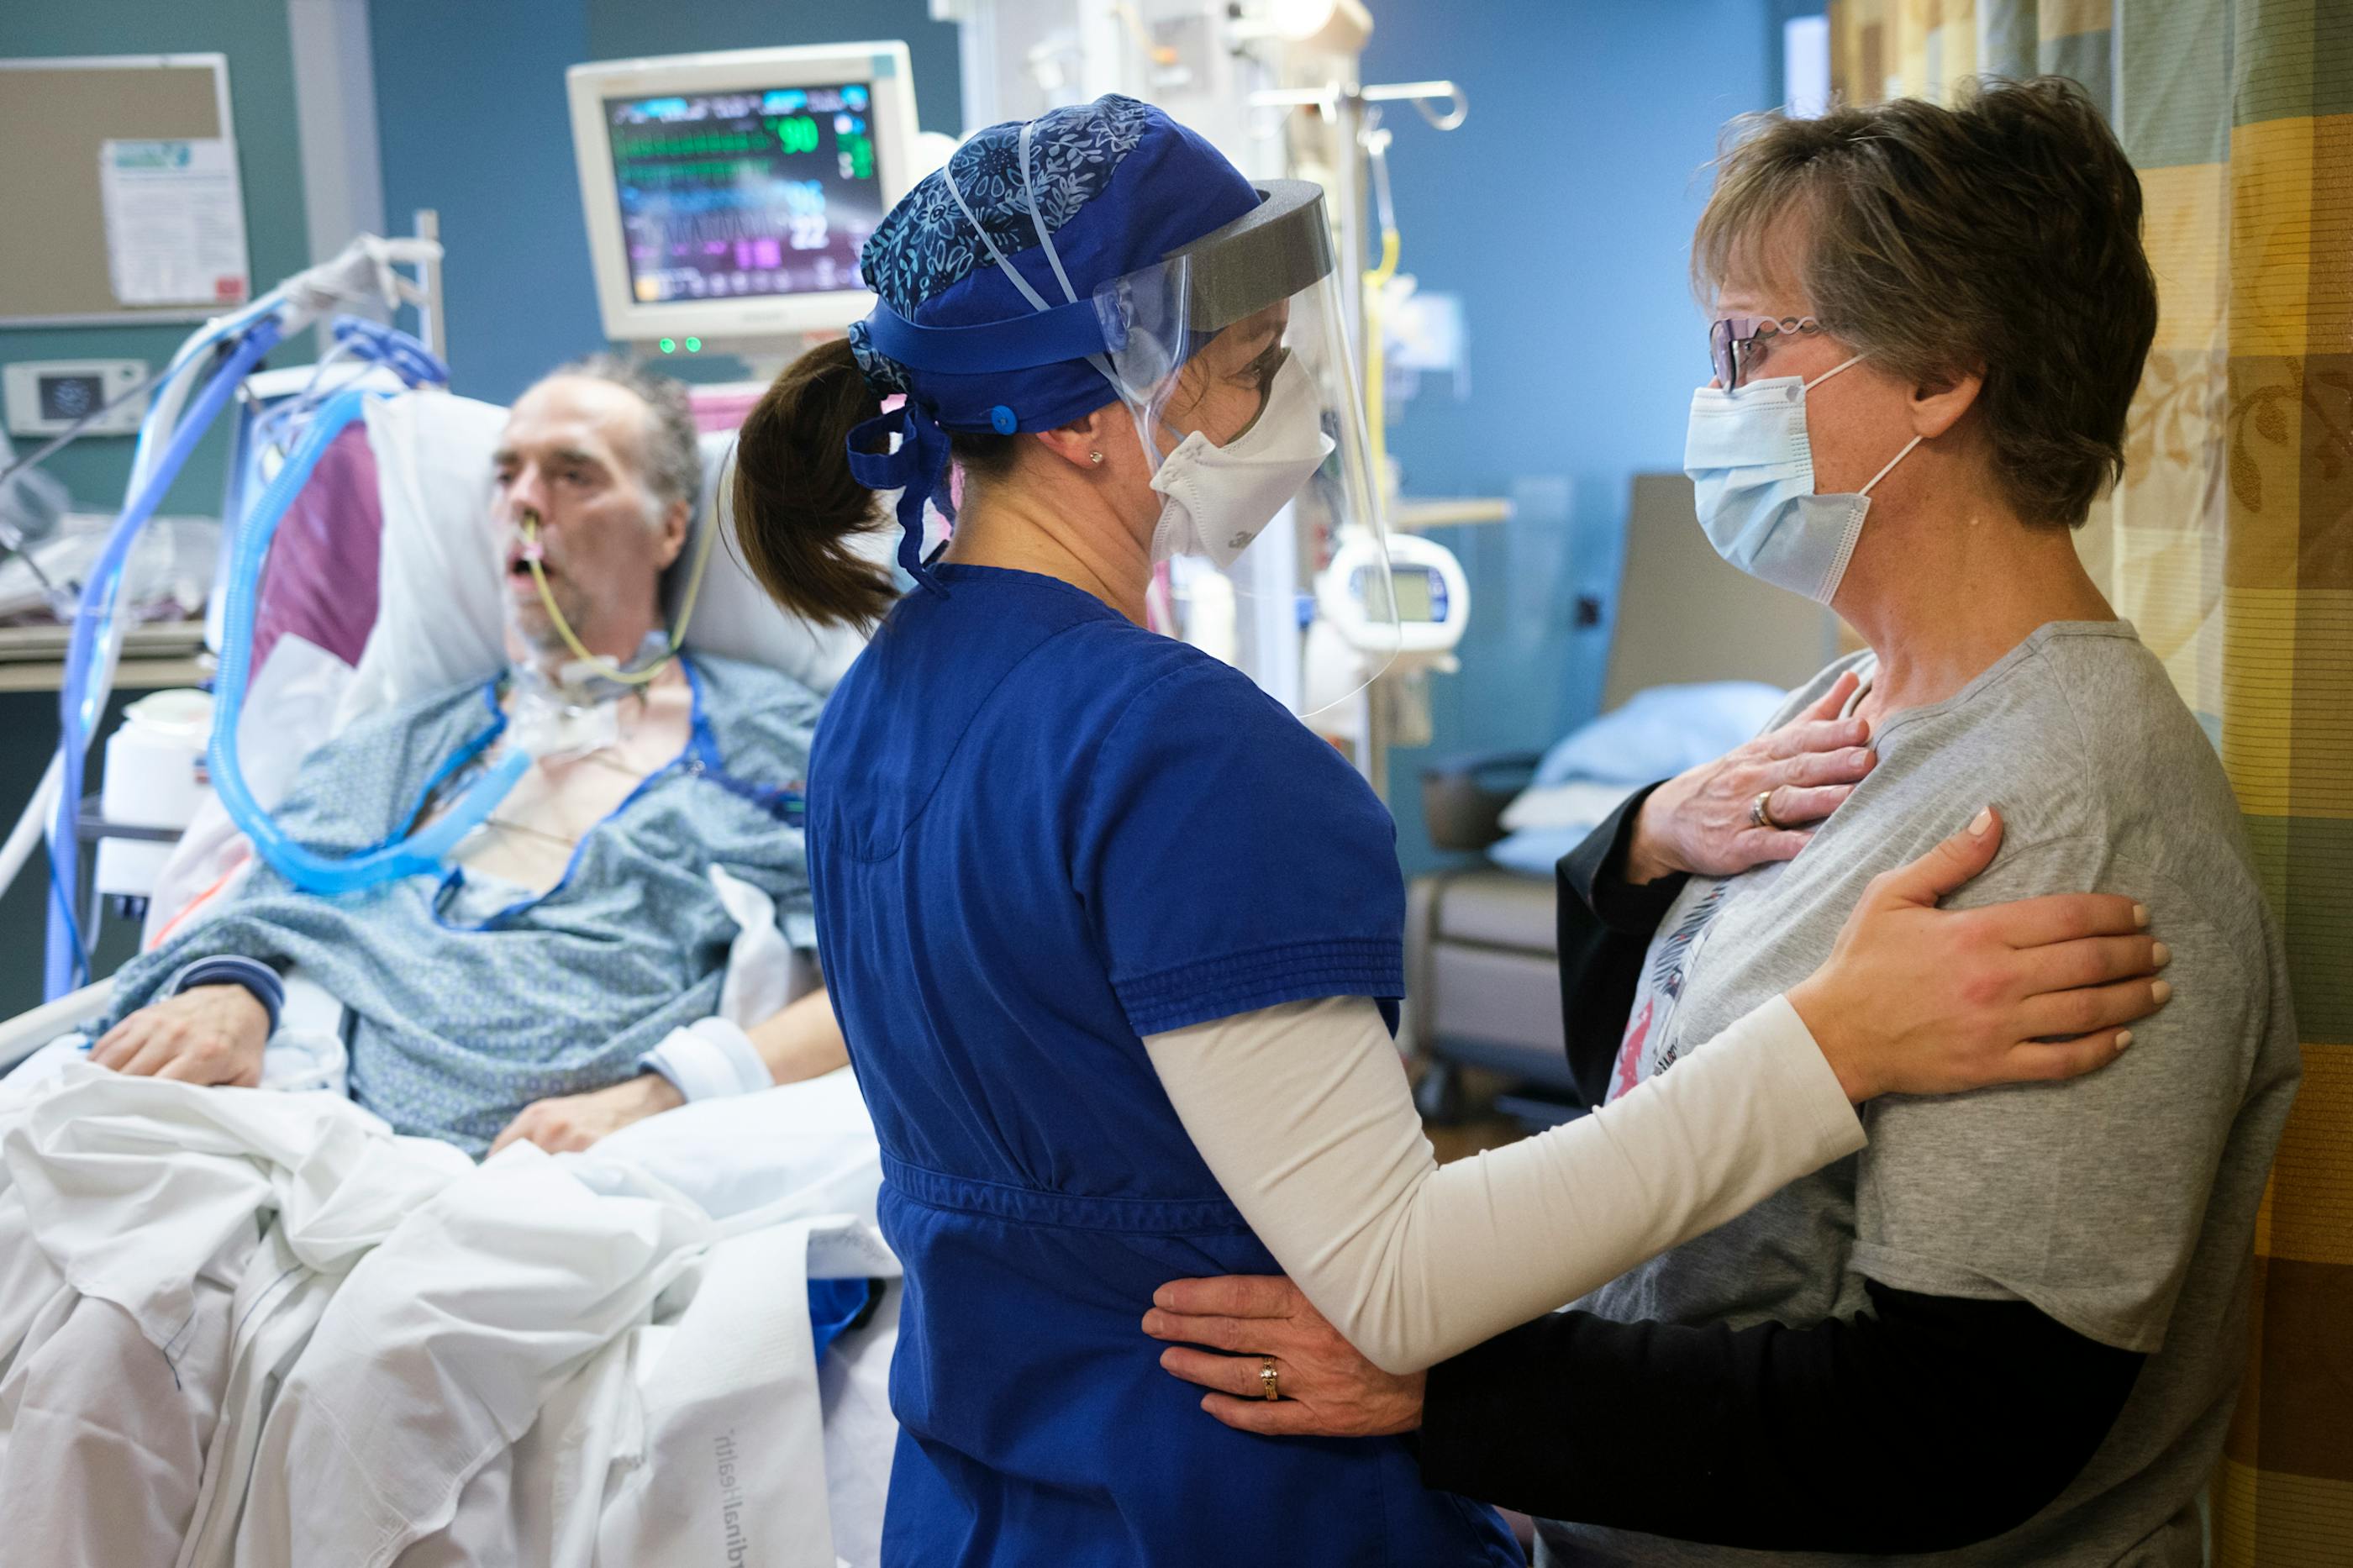 For Minnesota nurse on front lines, COVID19 fight is